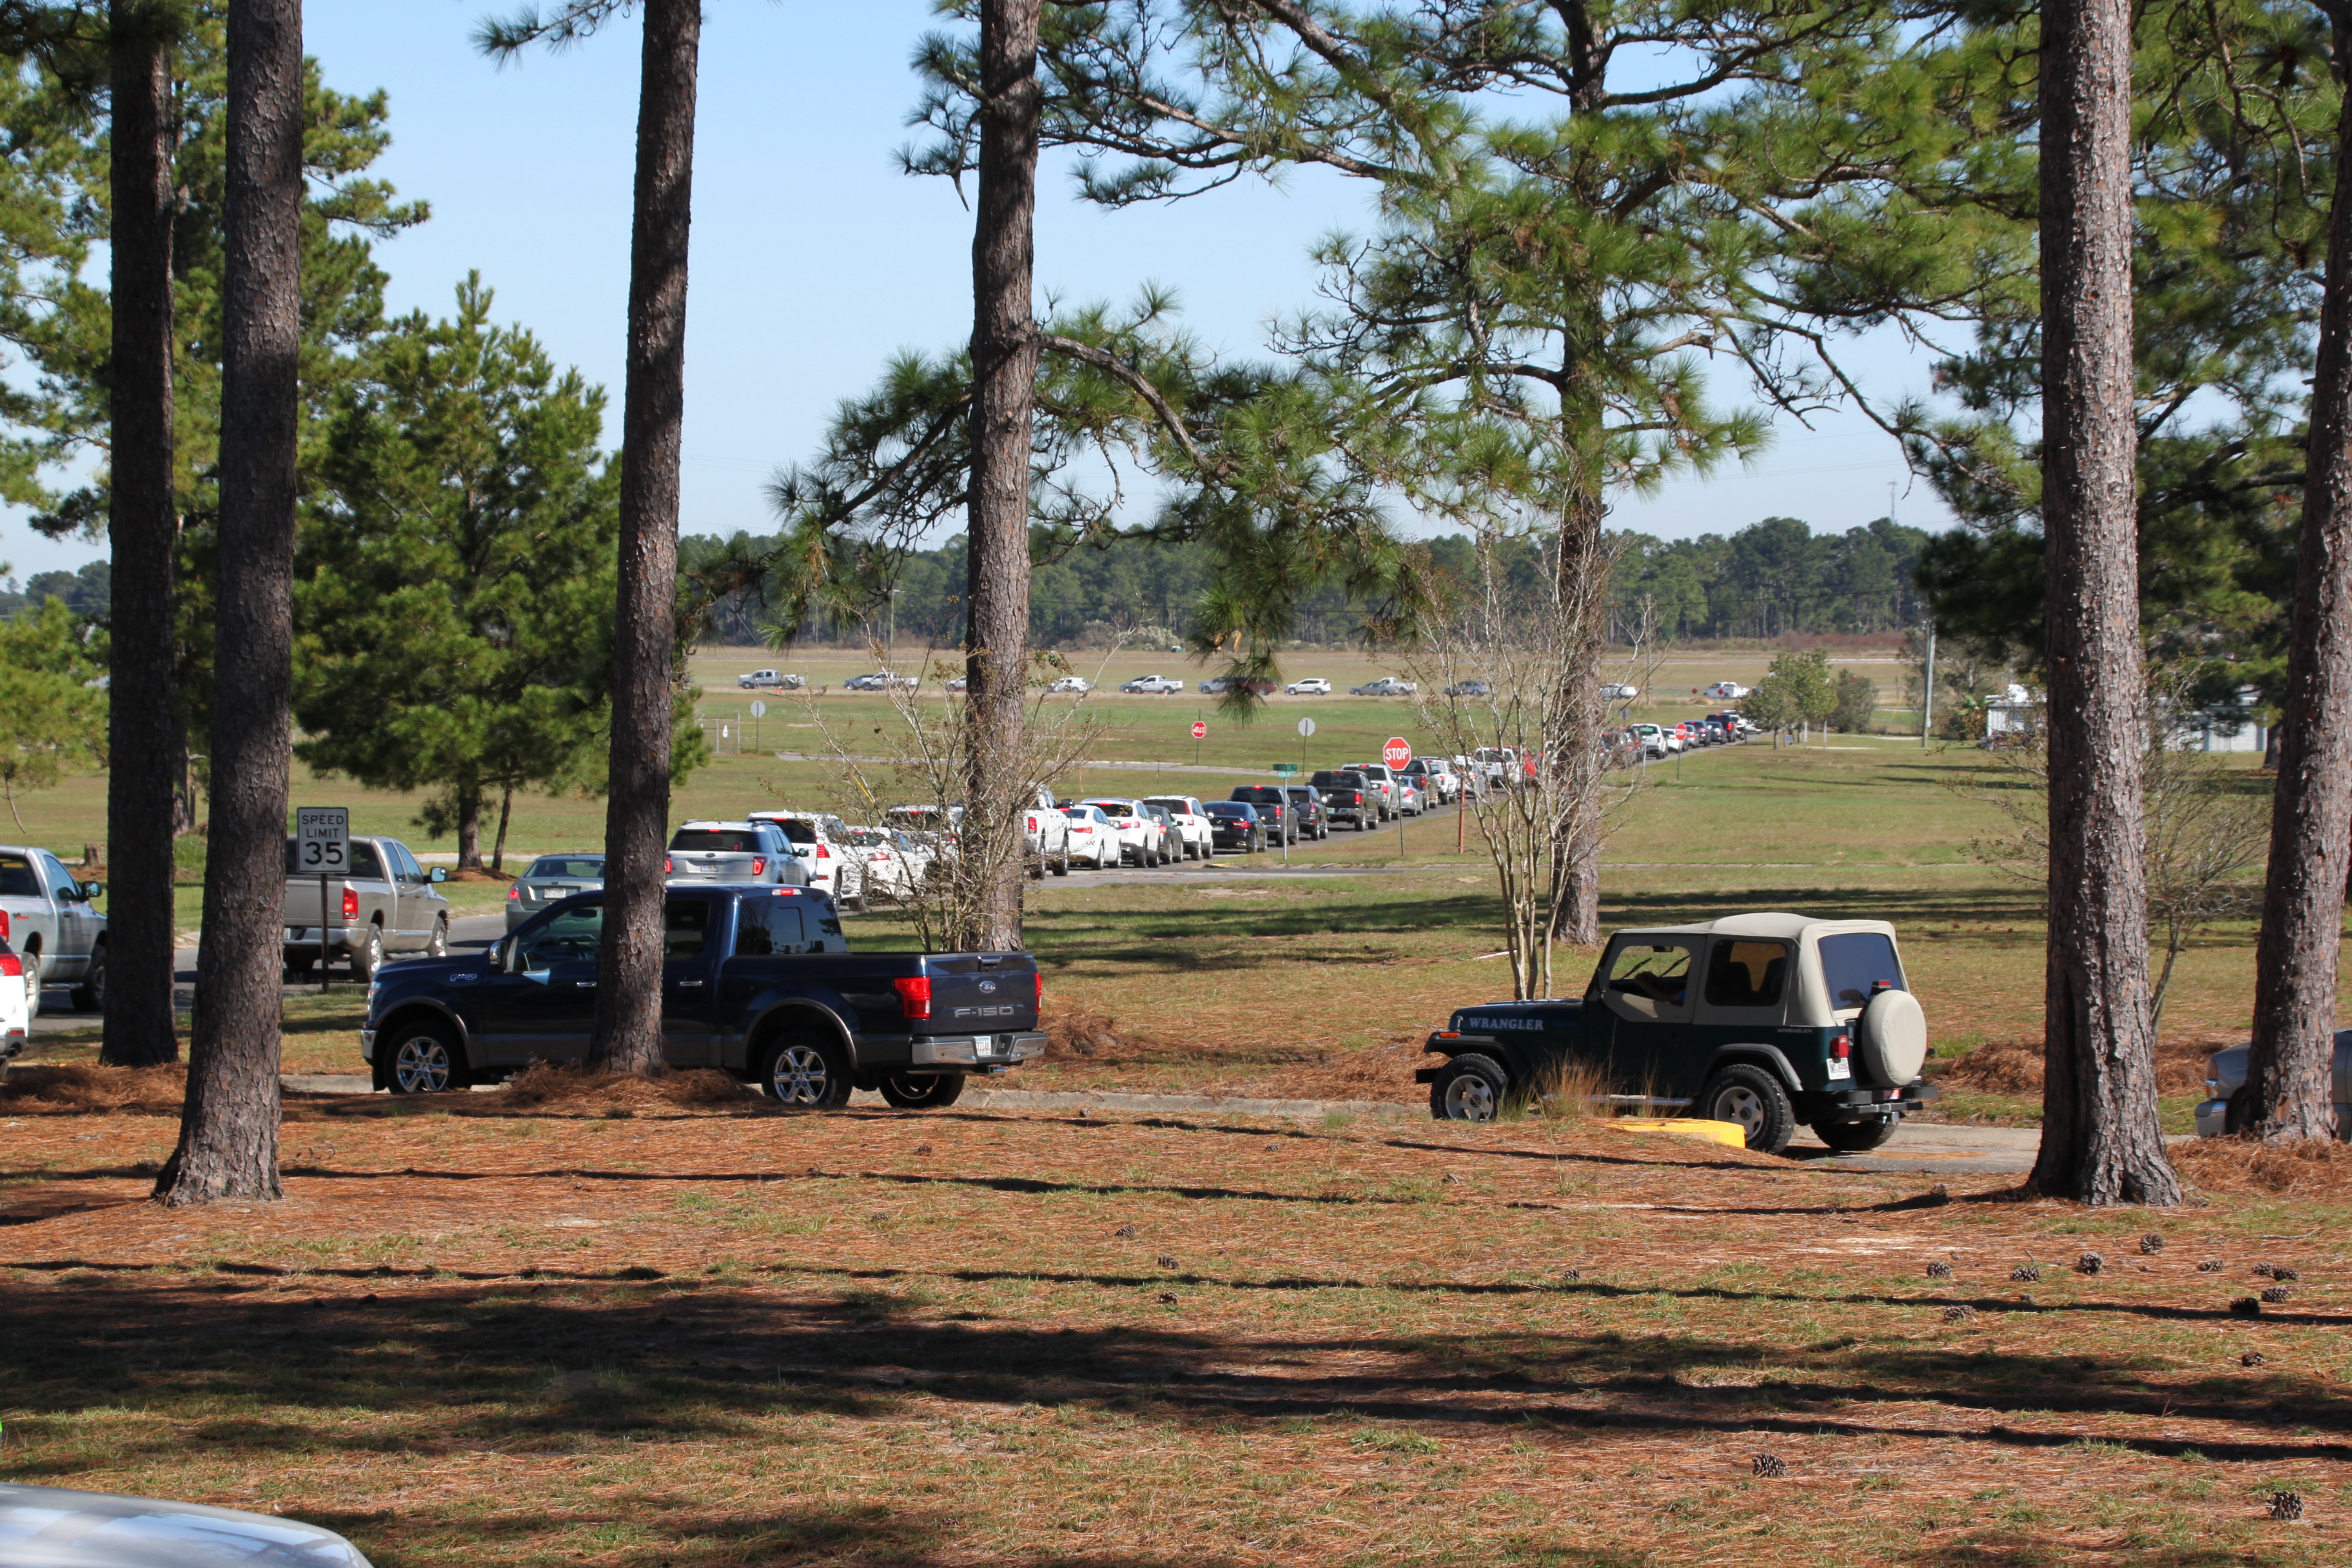 a long line of EMC members cars lined up for the drive-thru annual meeting